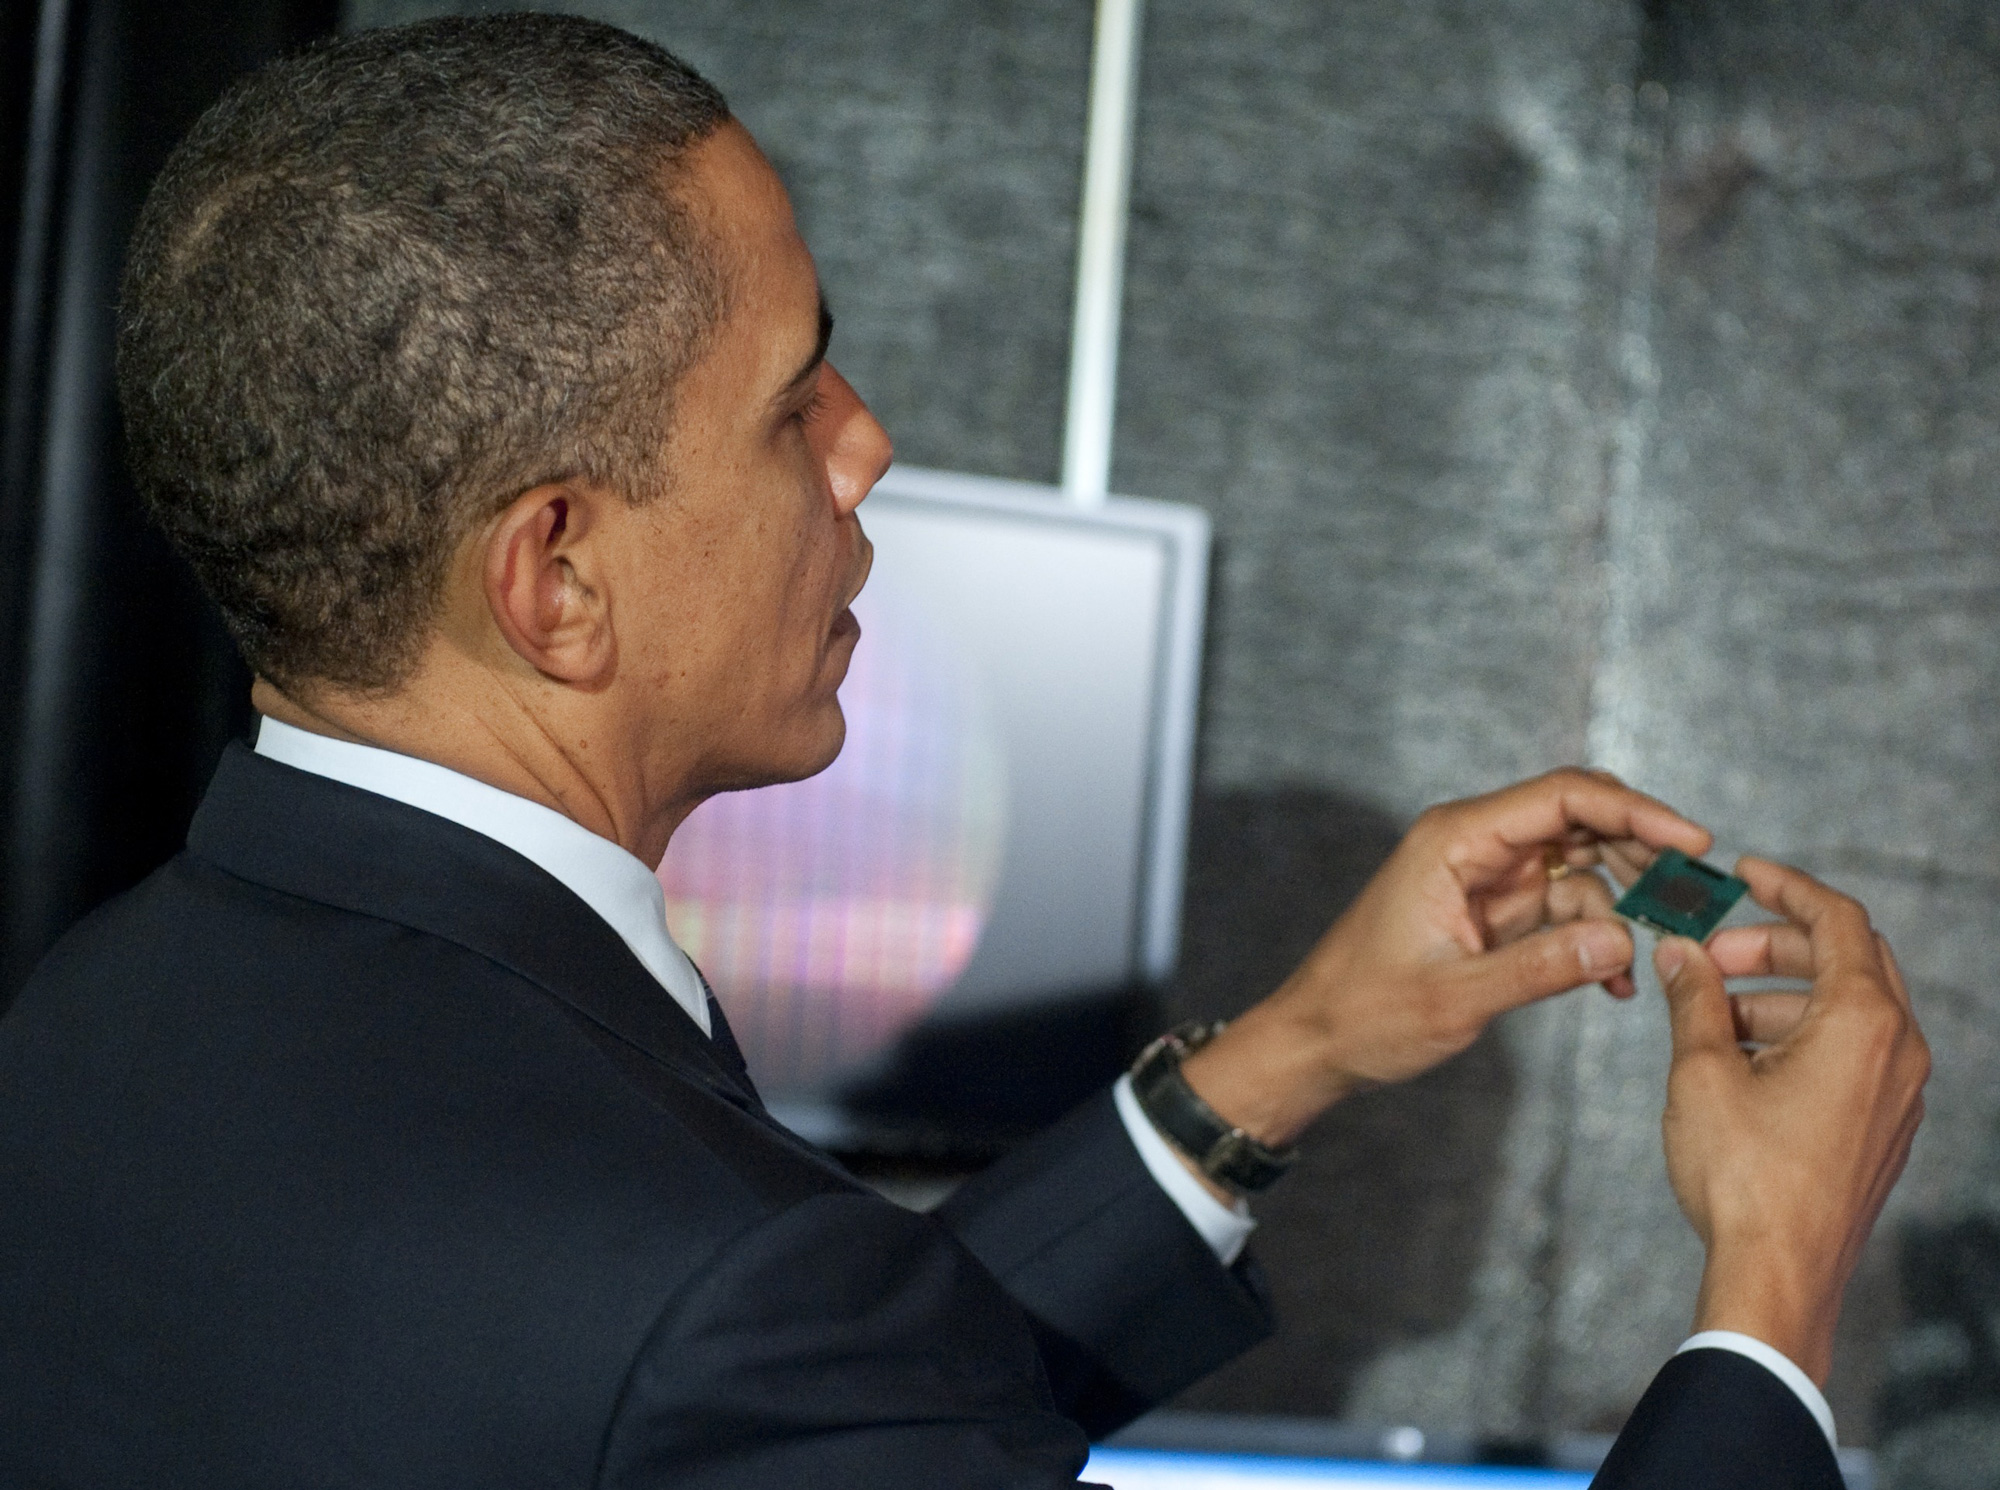 President Obama tours an Intel manufacturing facility in 2011.